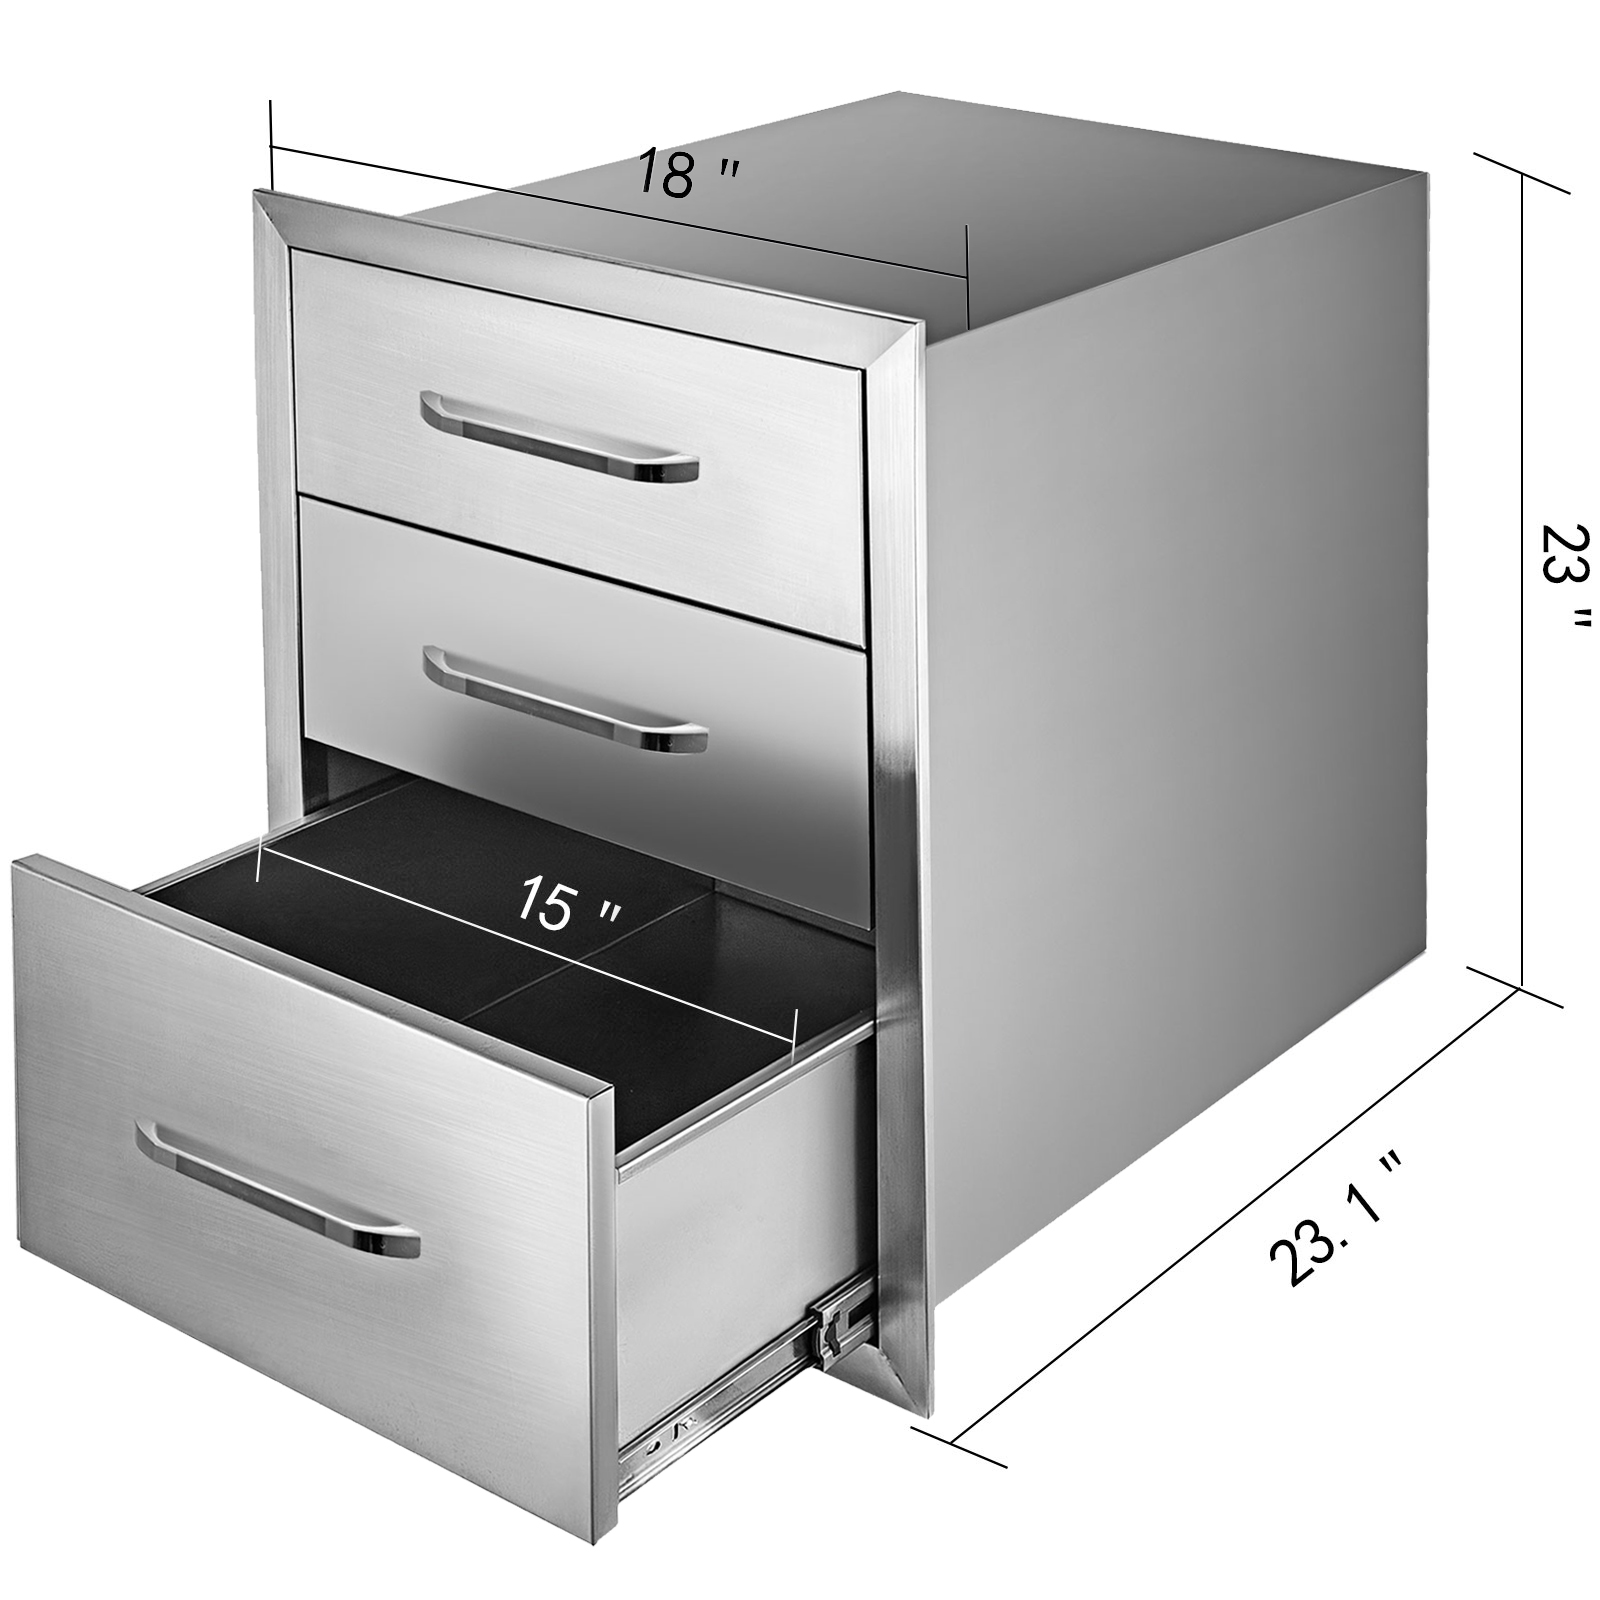 BBQ Triple Drawer 46 X 59CM Built-In 3 Drawers Outdoor Grilling Modular ...